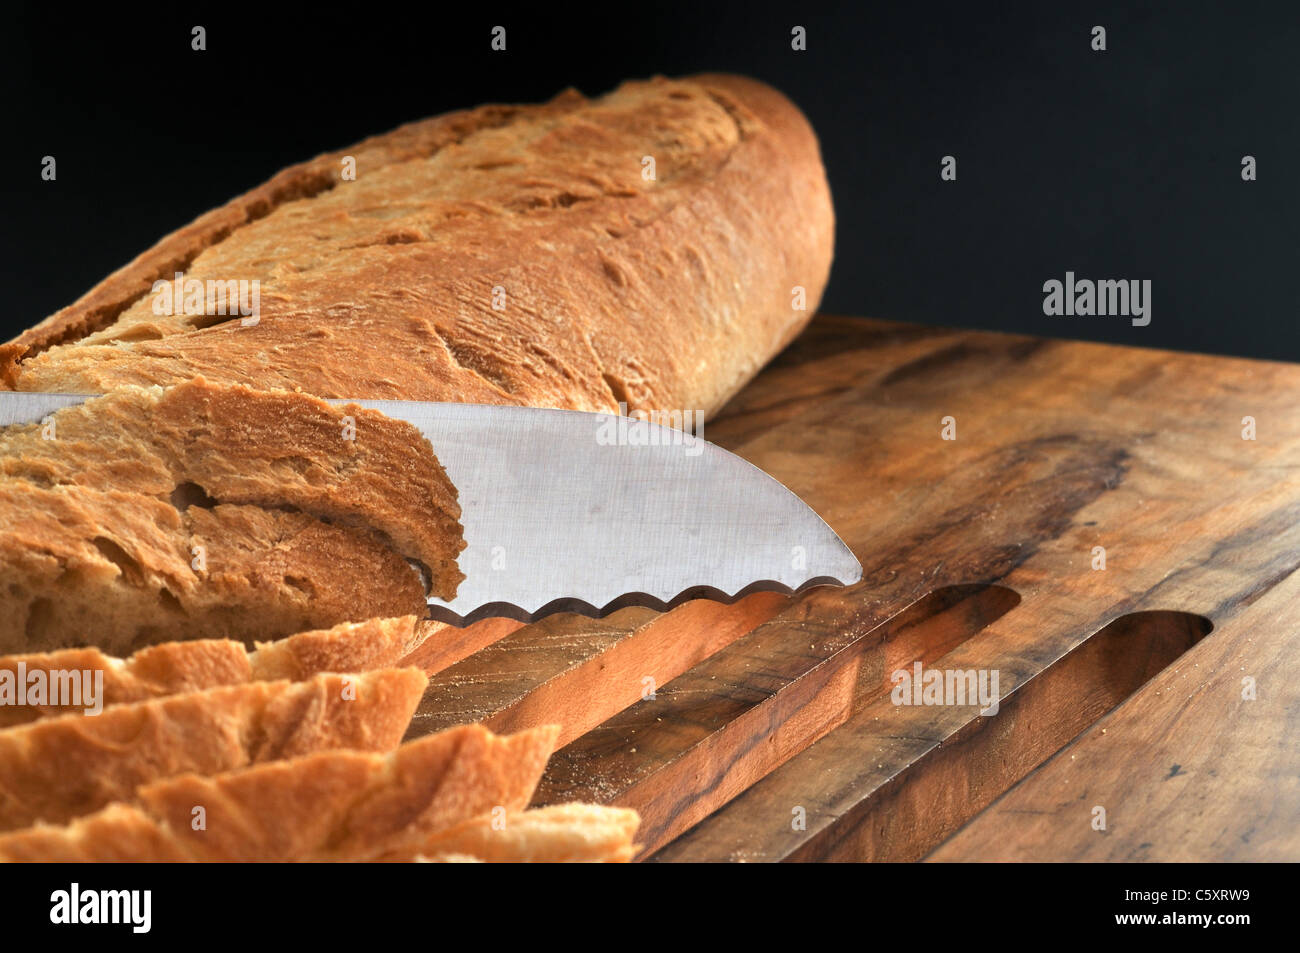 Cutting slices from bread loaf Stock Photo